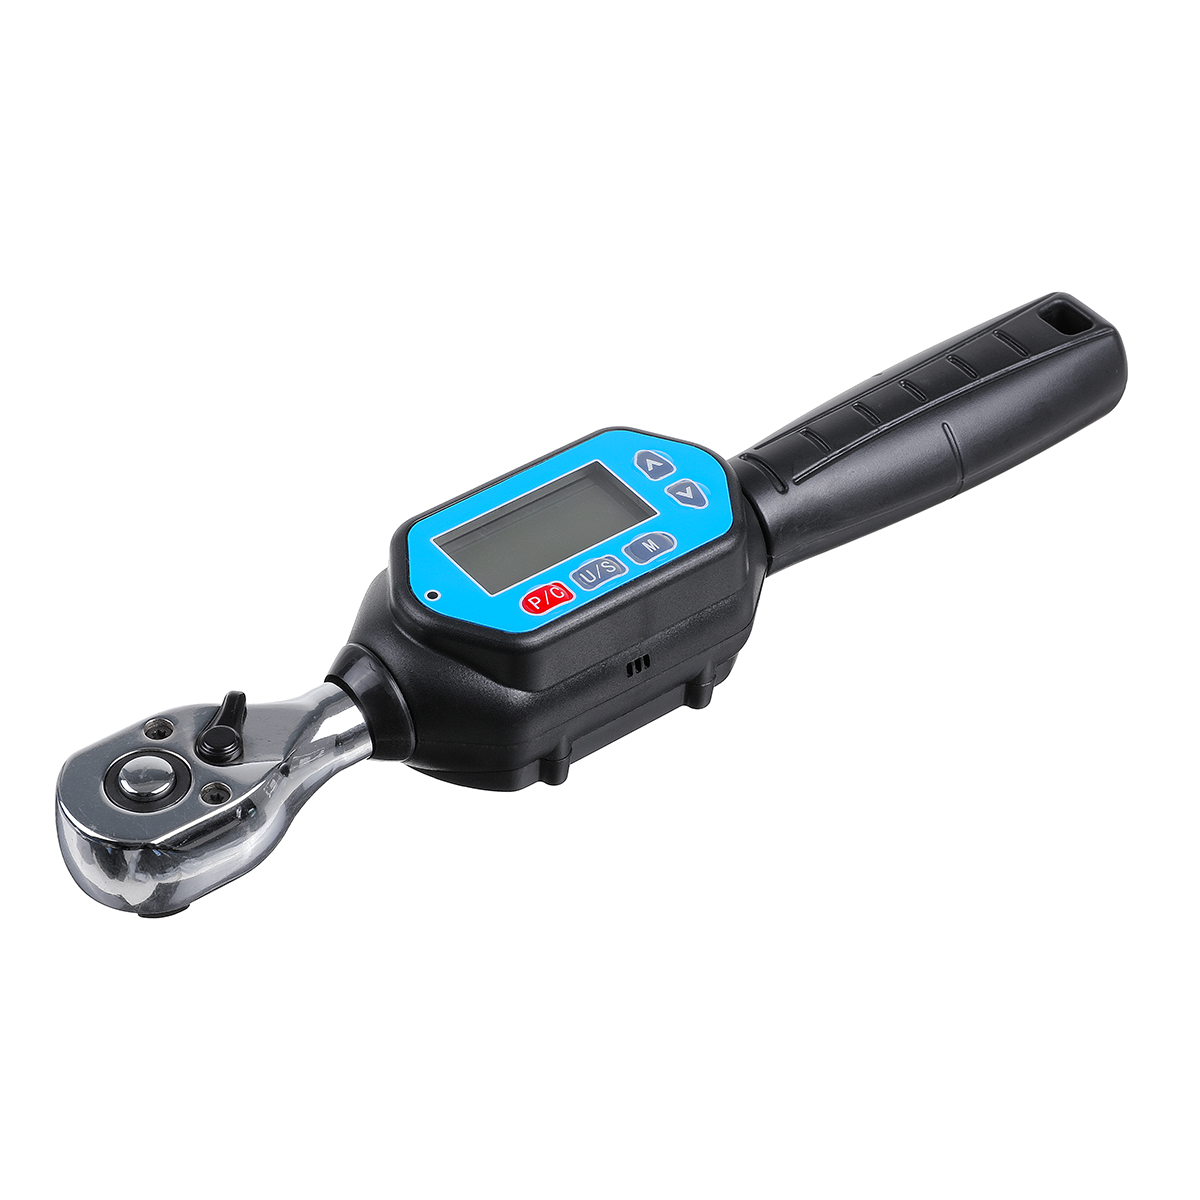 Drillpro-1PCS-Battery-free-Dual-purpose-Adjustable-Wrench-Auto-Repair-Bolt-Torque-Wrench-Mini-Electr-1907326-8